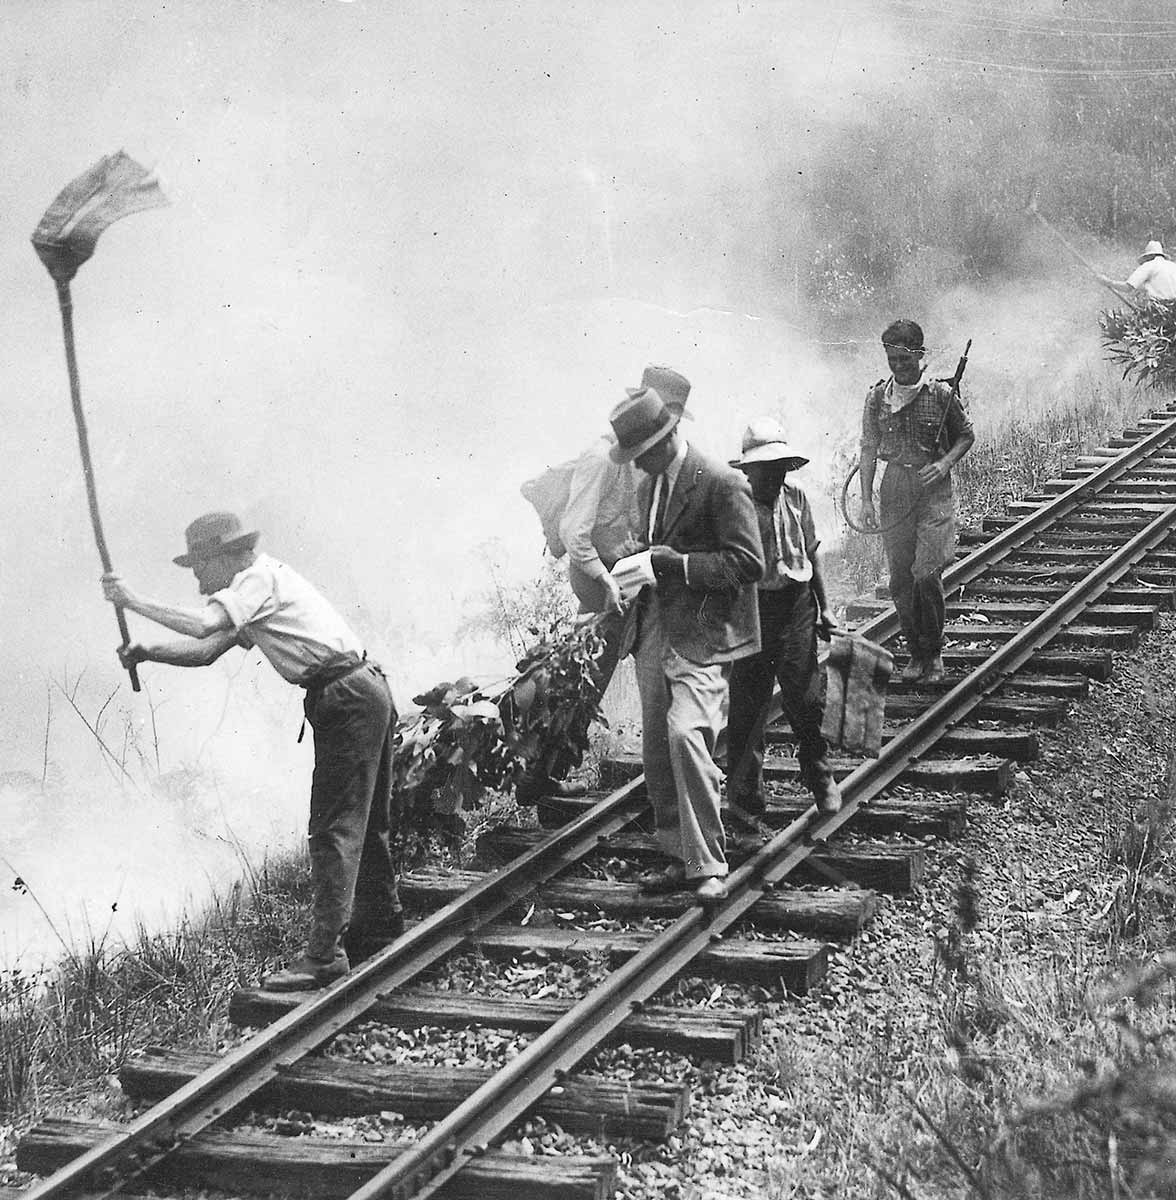 Black and white photograph of men along train tracks attempting to fight a fire.